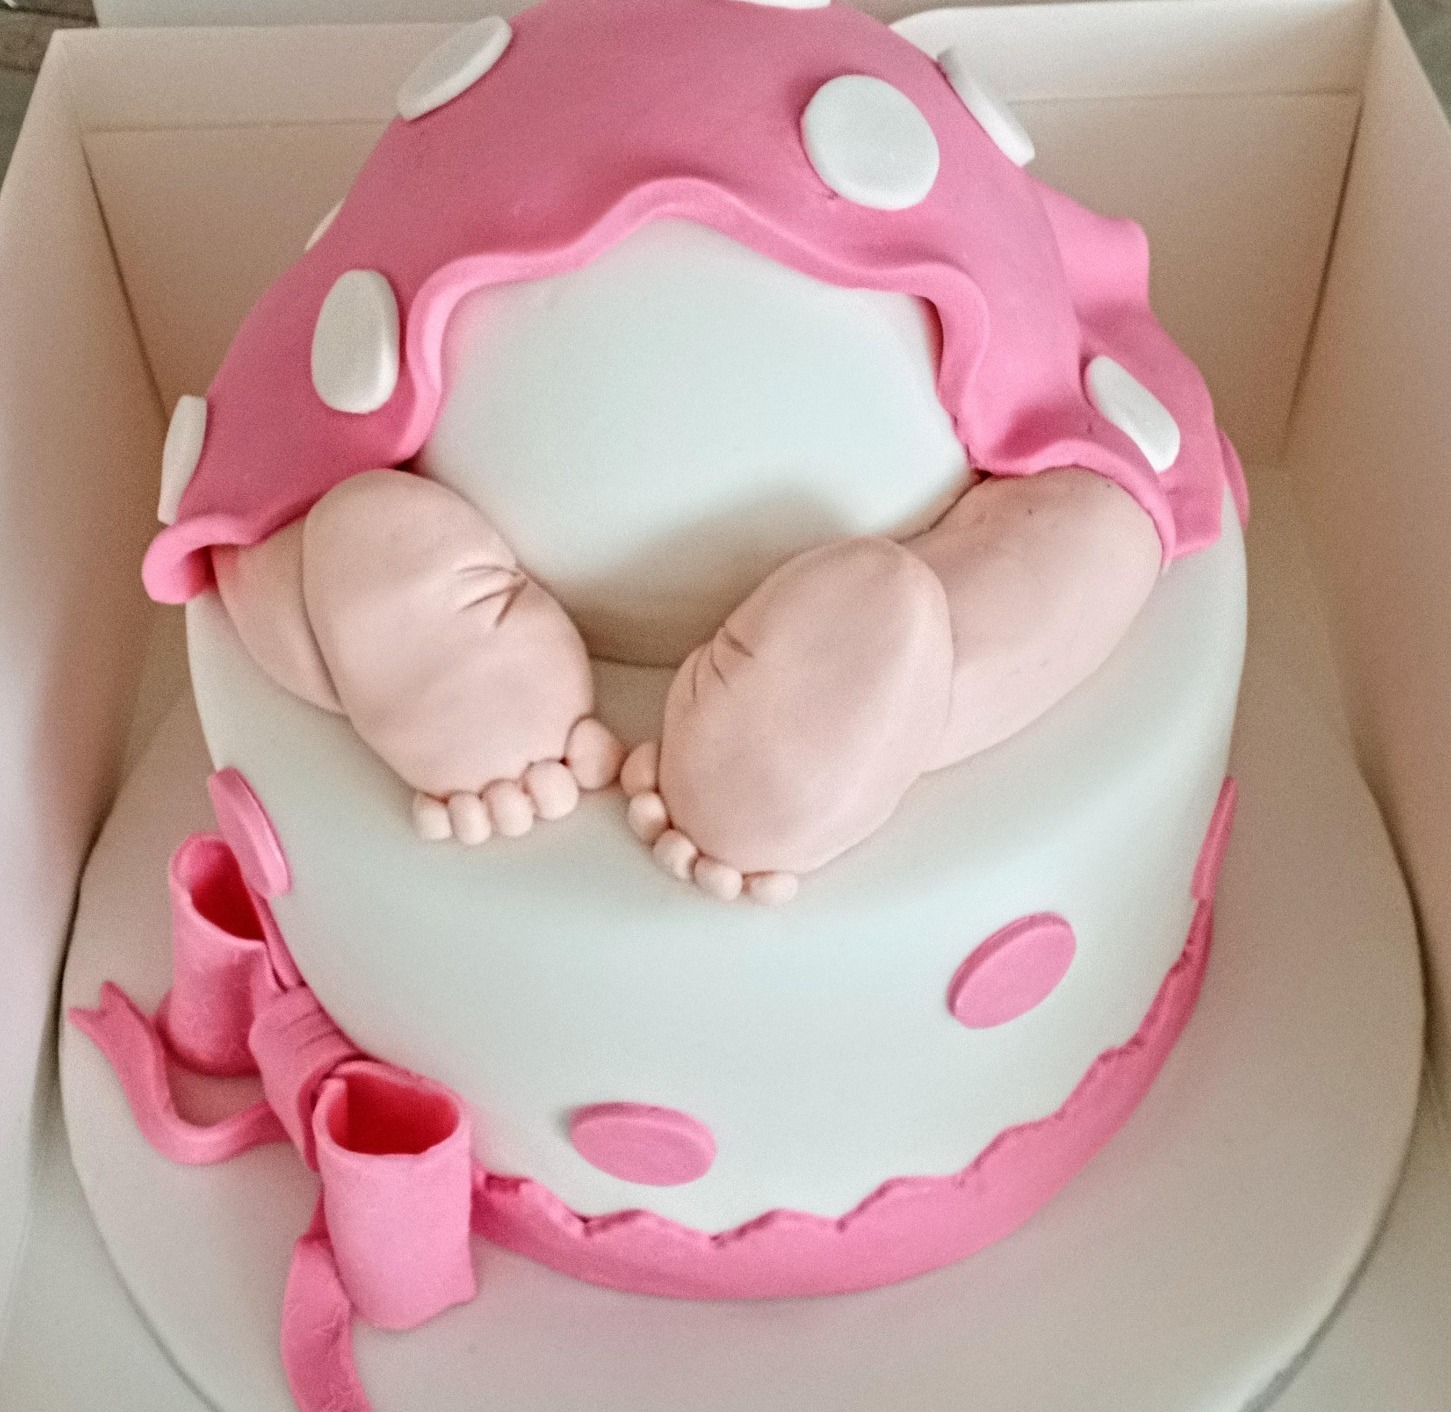 "Baby bum" baby shower cake for a girl